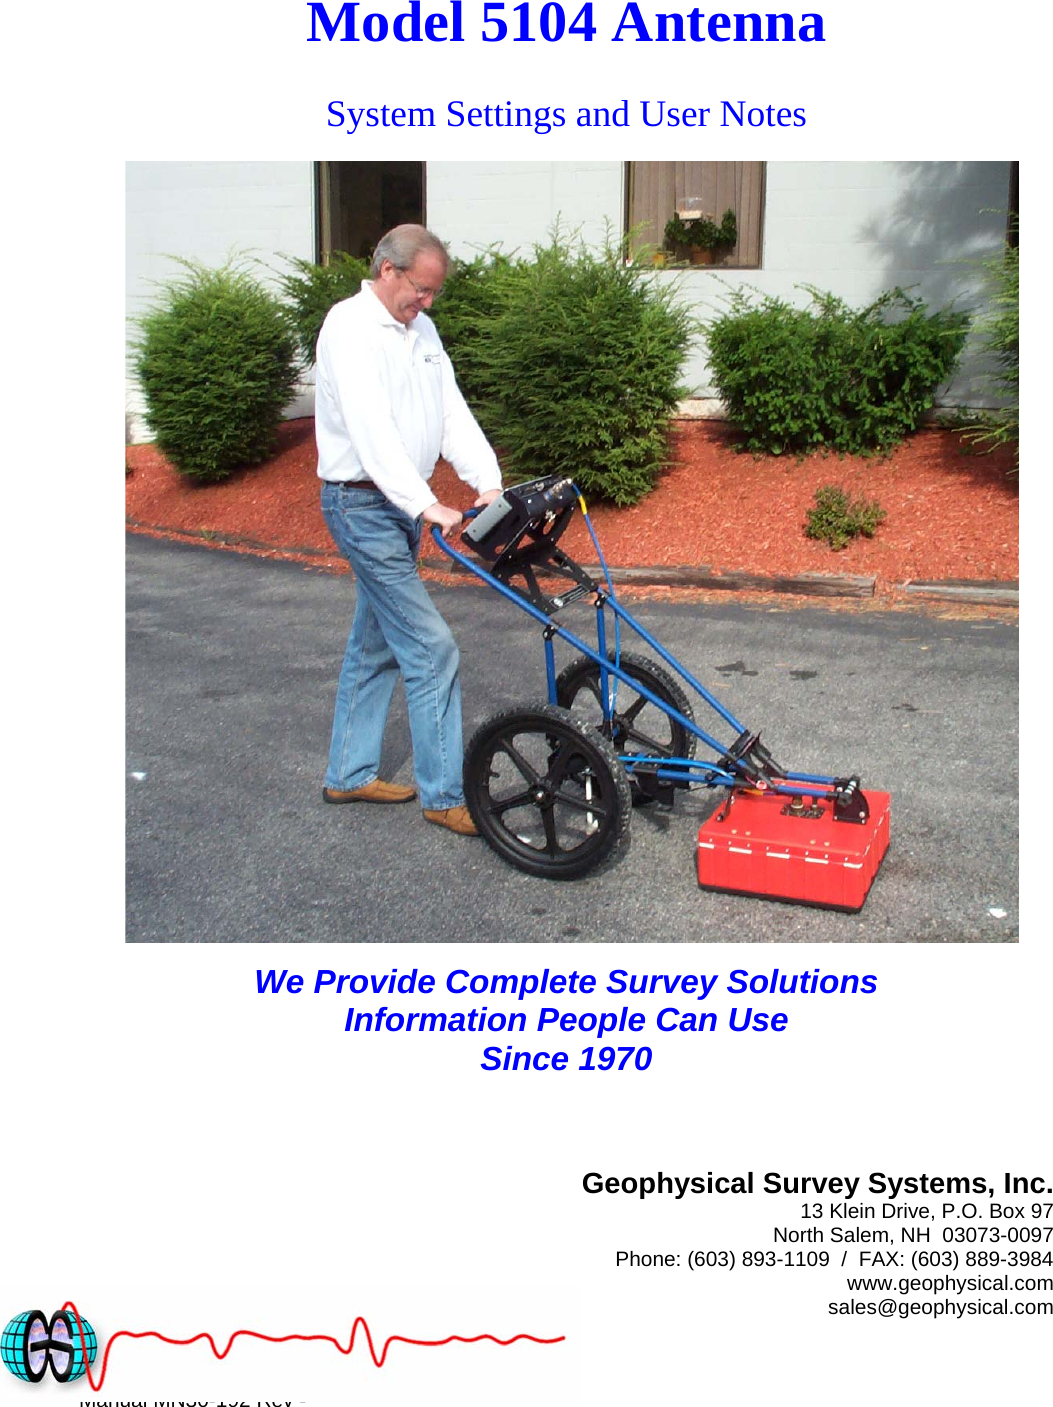 Model 5104 Antenna System Settings and User Notes   We Provide Complete Survey Solutions Information People Can Use Since 1970    Geophysical Survey Systems, Inc. 13 Klein Drive, P.O. Box 97 North Salem, NH  03073-0097 Phone: (603) 893-1109  /  FAX: (603) 889-3984 www.geophysical.com Manual MN30-192 Rev - sales@geophysical.com 